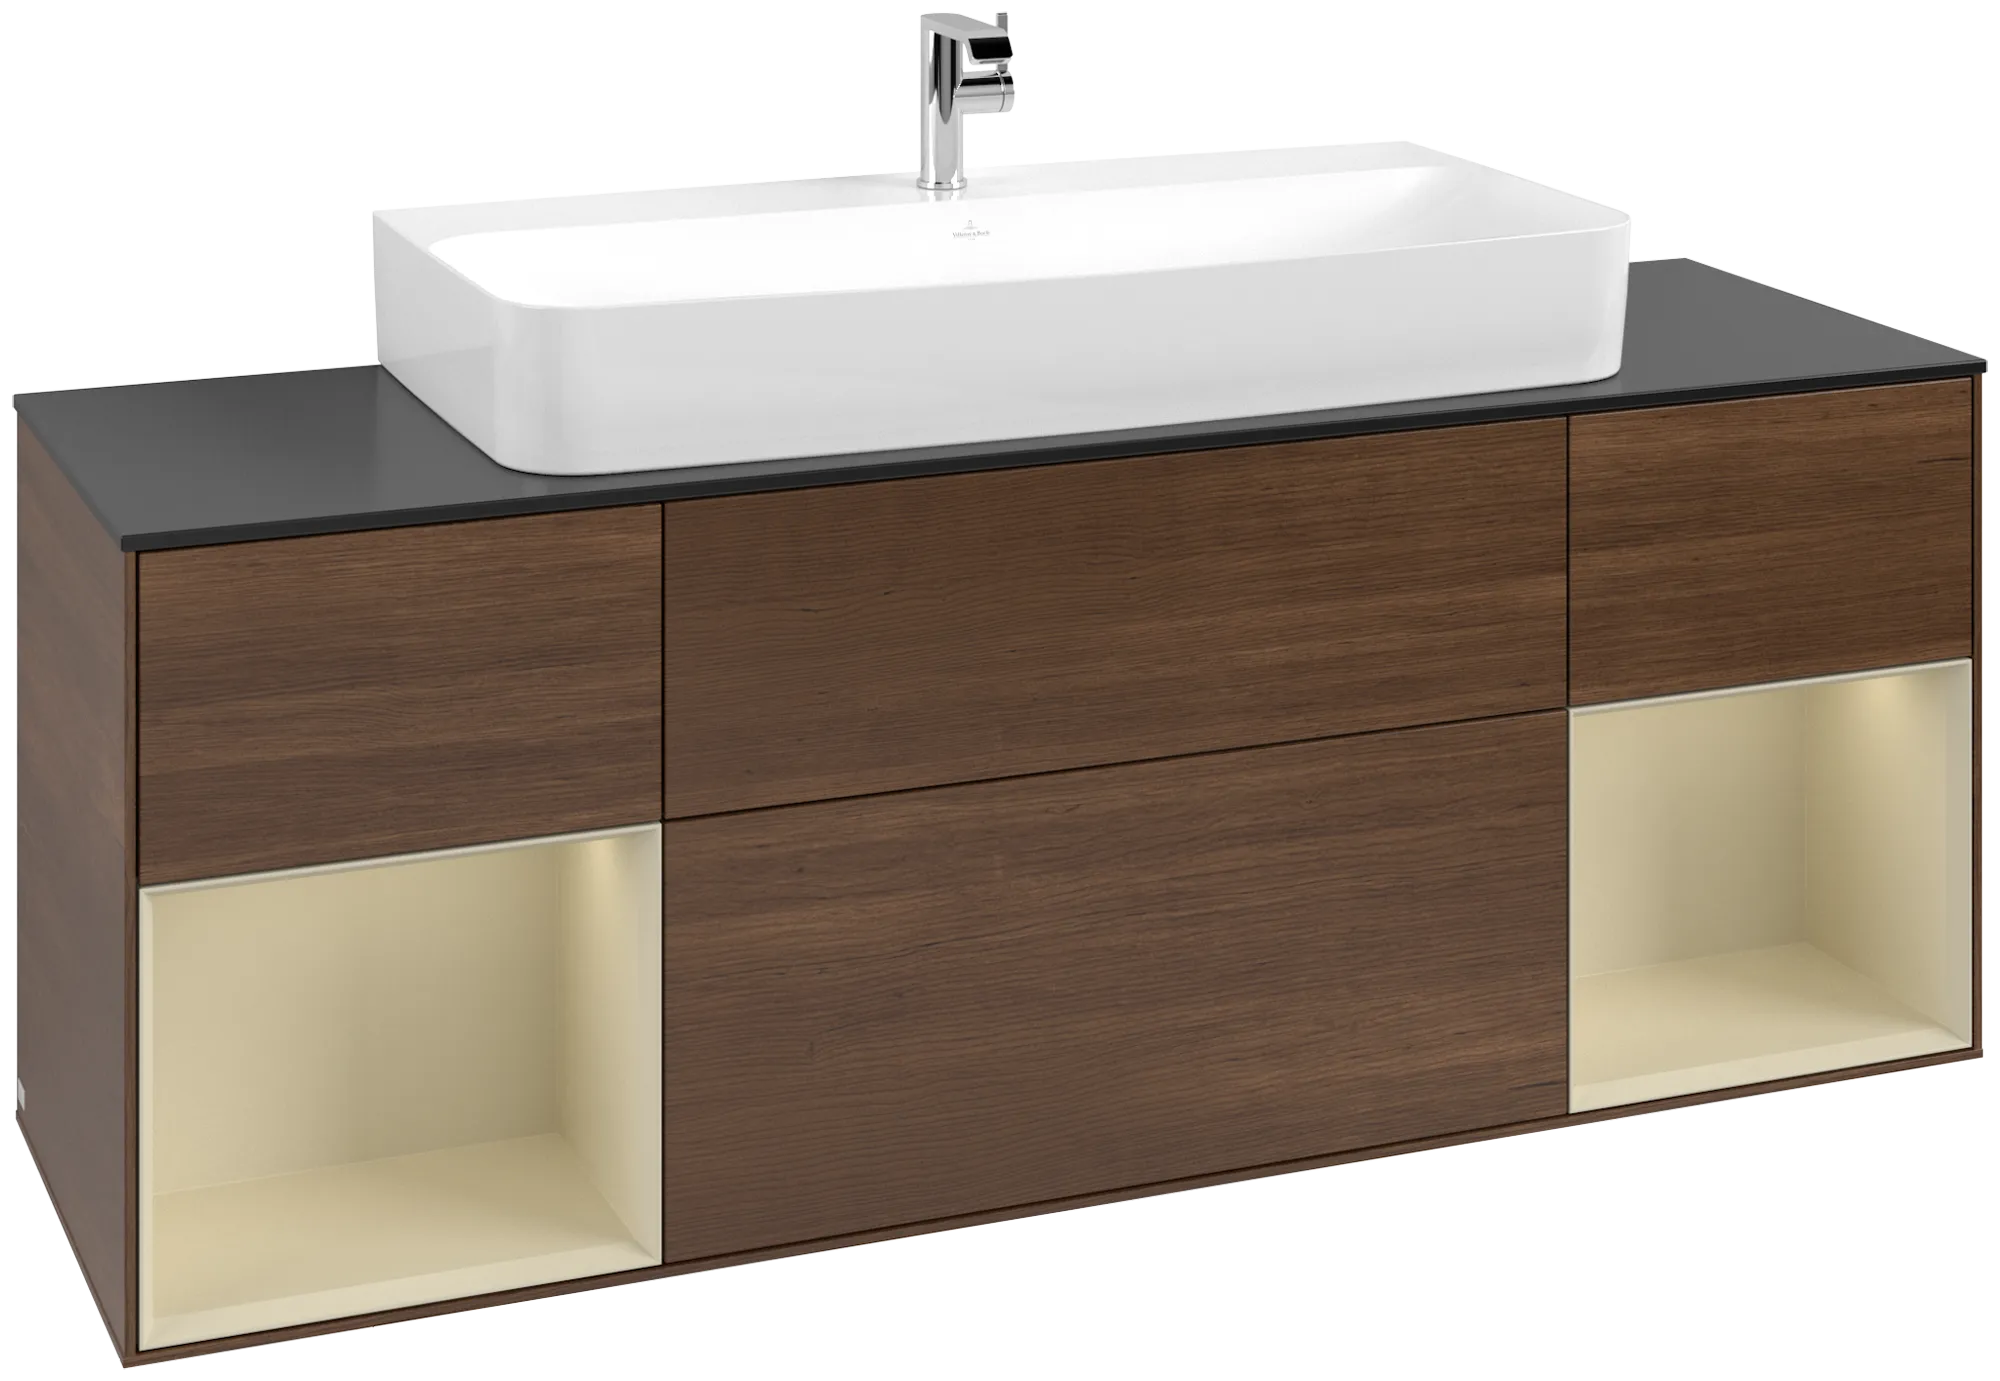 Picture of VILLEROY BOCH Finion Vanity unit, with lighting, 4 pull-out compartments, 1600 x 603 x 501 mm, Walnut Veneer / Silk Grey Matt Lacquer / Glass Black Matt #G212HJGN